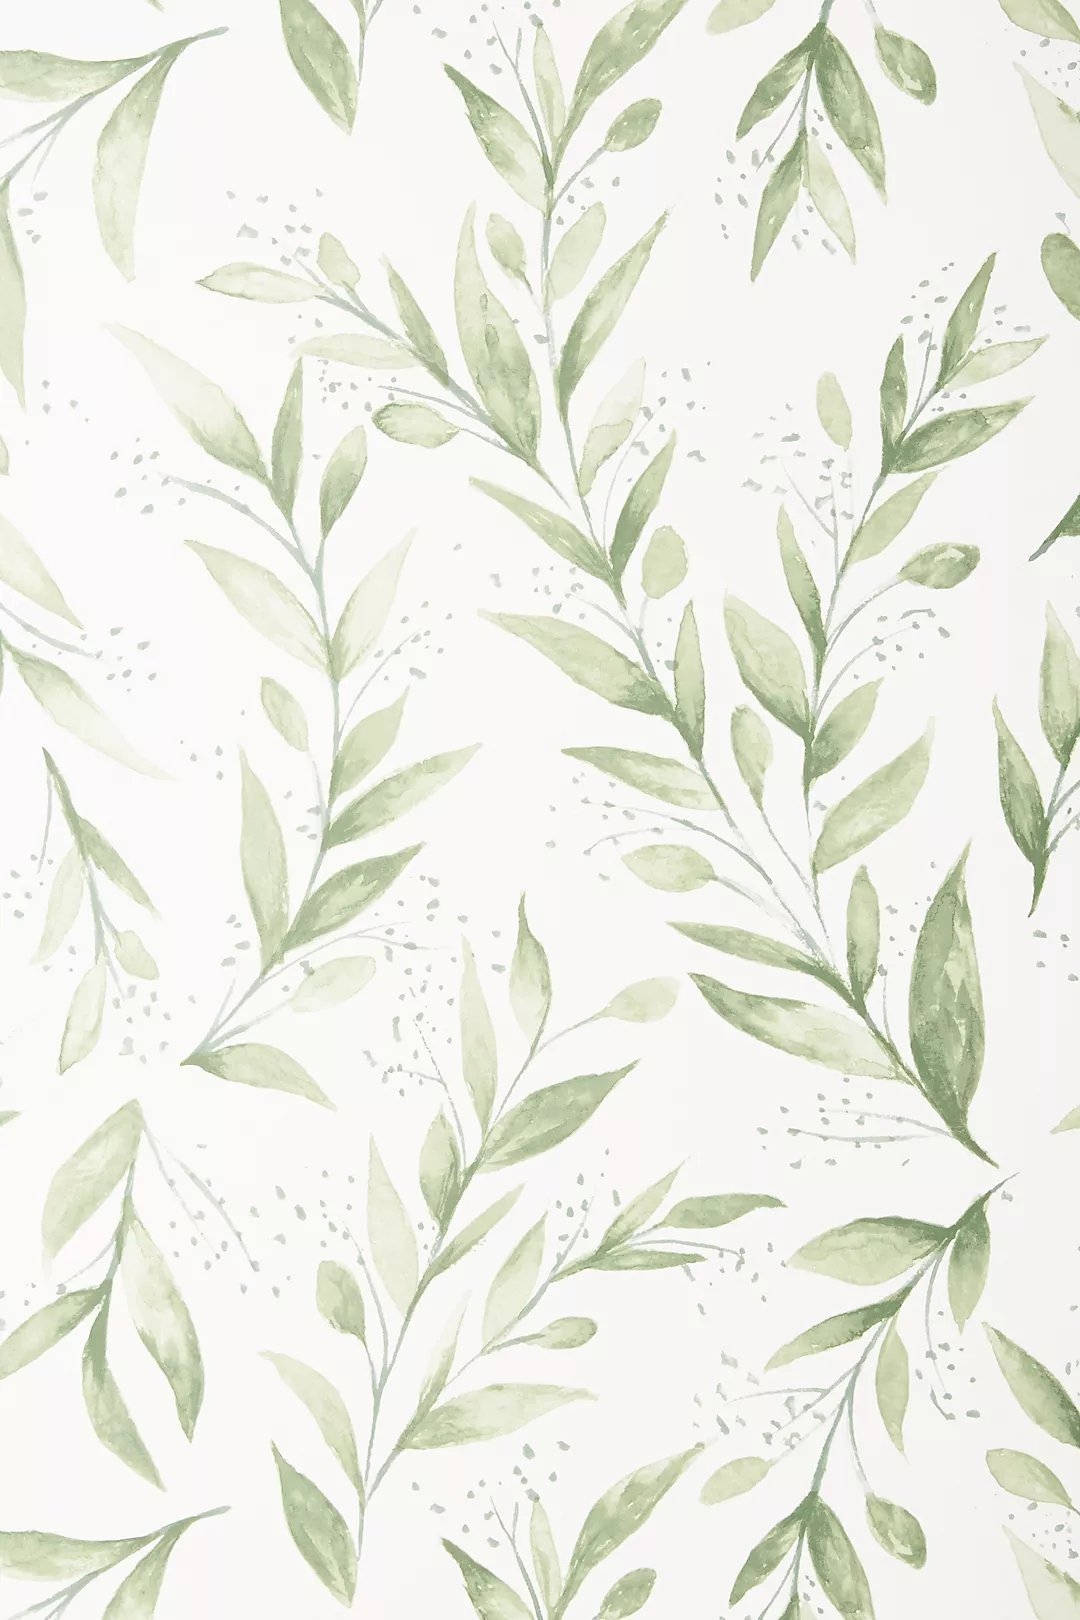 Magnolia Home Olive Branch Wallpaper By Magnolia Home in Black Size SWATCH - Image 0